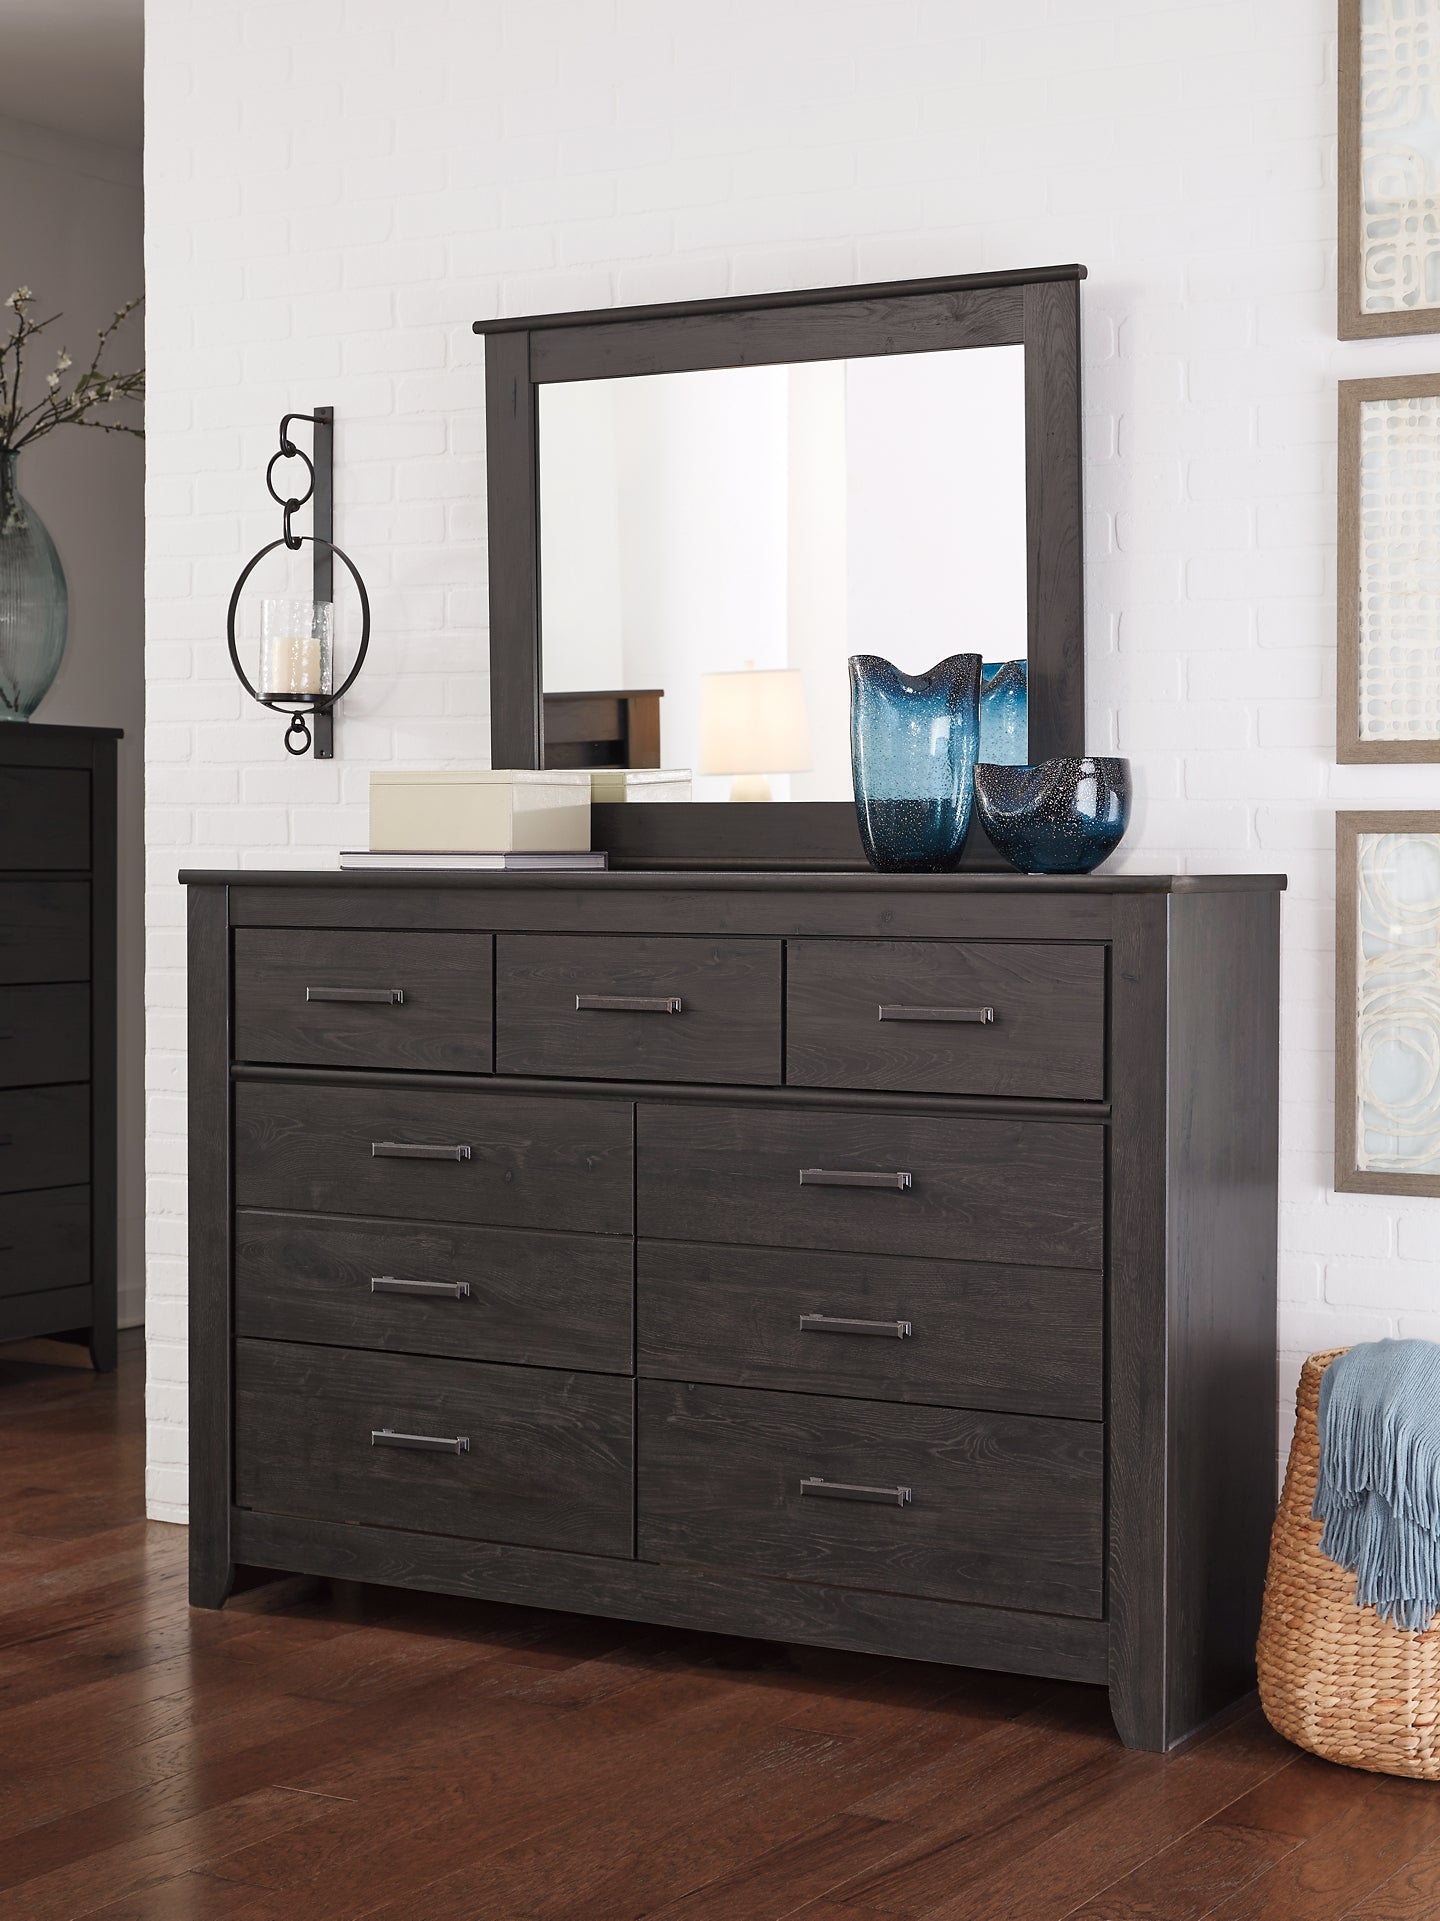 Brinxton Full Panel Headboard with Mirrored Dresser, Chest and Nightstand